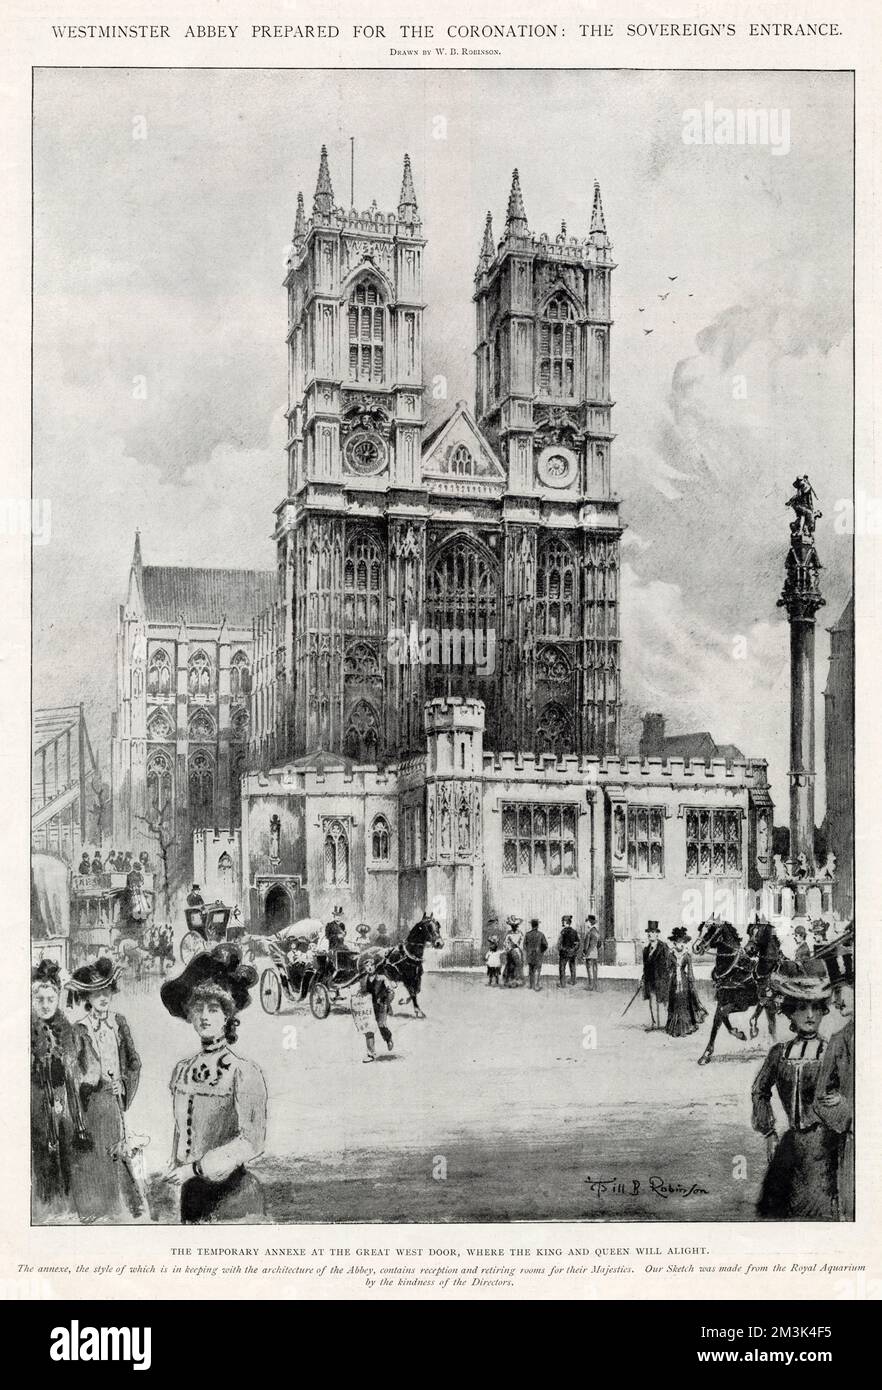 The coronation of Edward VII and Alexandra. Exterior of Westminster Abbey, London, with the temporary Annex at the Great West Door. The annex was built to contain reception and retiring rooms for the King and Queen during their 1902 coronation.     Date: 31 May 1902 Stock Photo